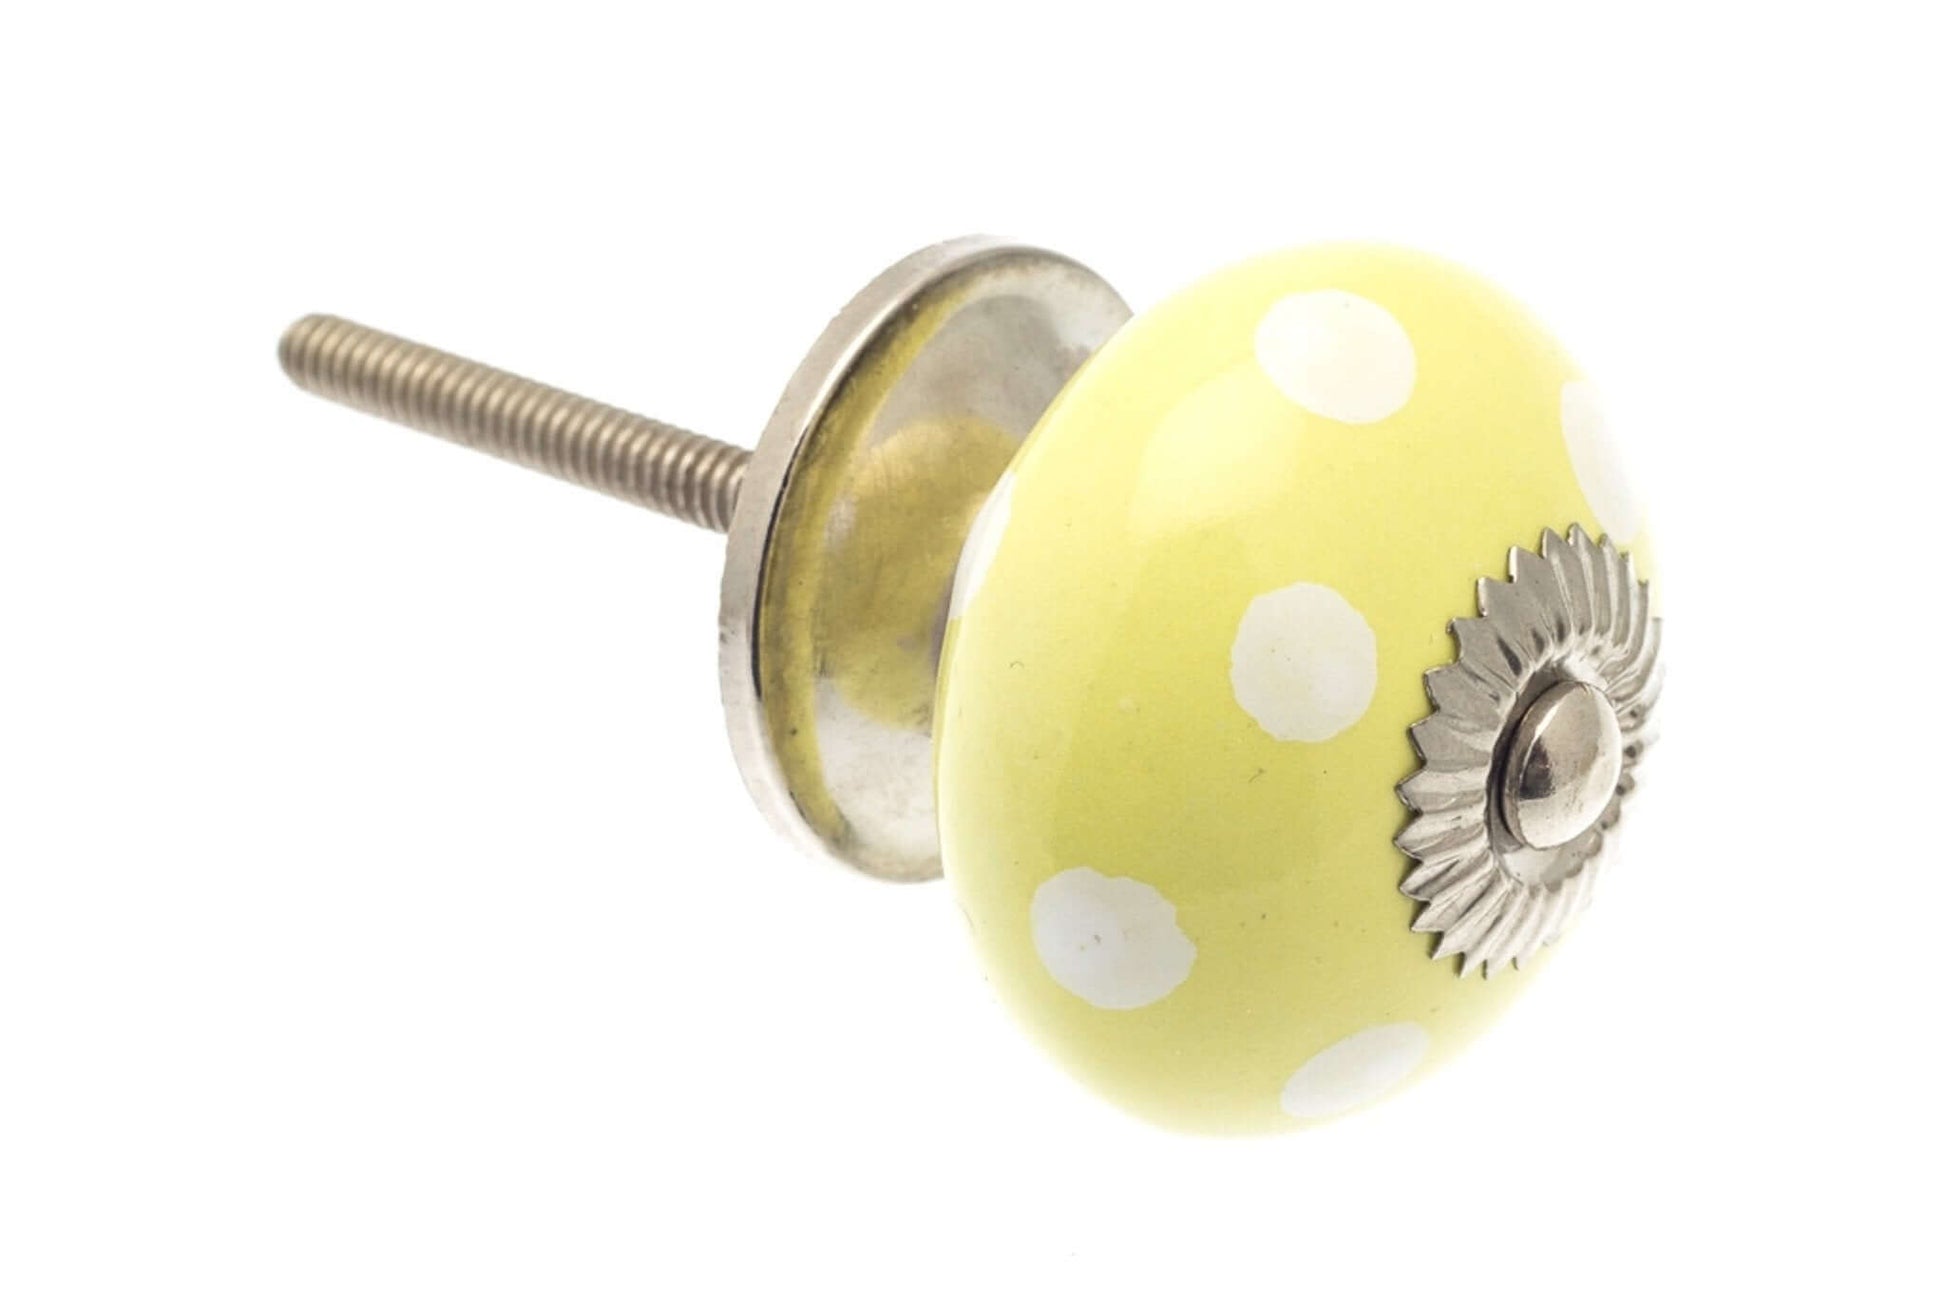 Ceramic Cupboard Knobs - Round Ceramic Cupboard Knob Yellow With White Spots / Dots 40mm (MT-53)